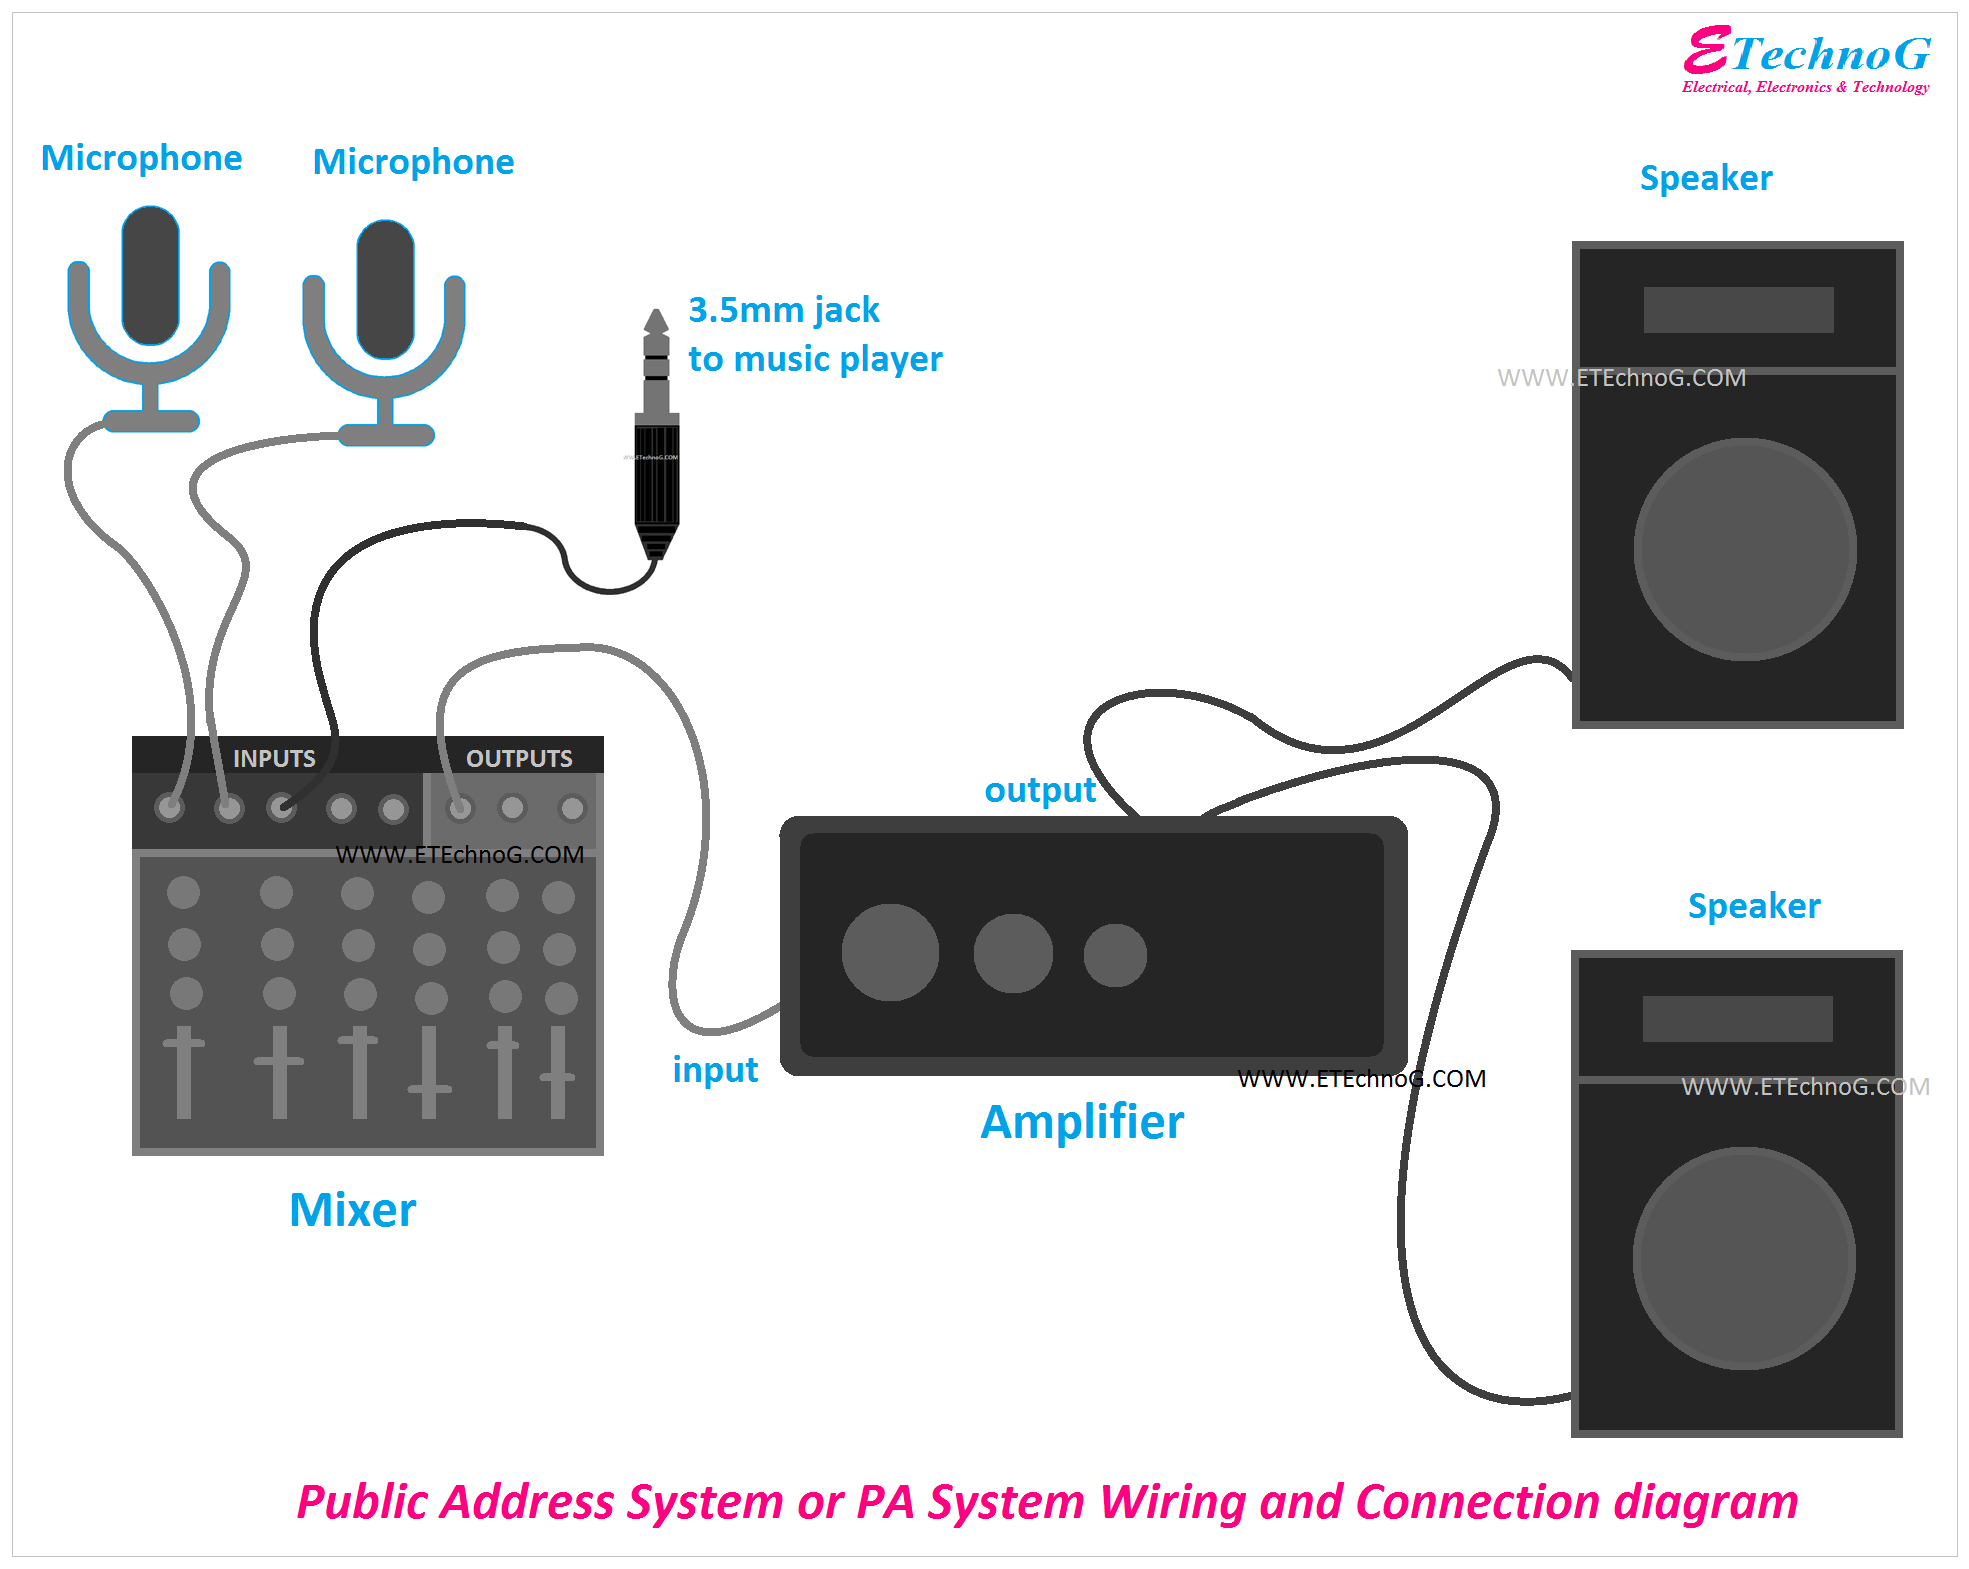 Public Address System or PA System Wiring and Connection Diagram